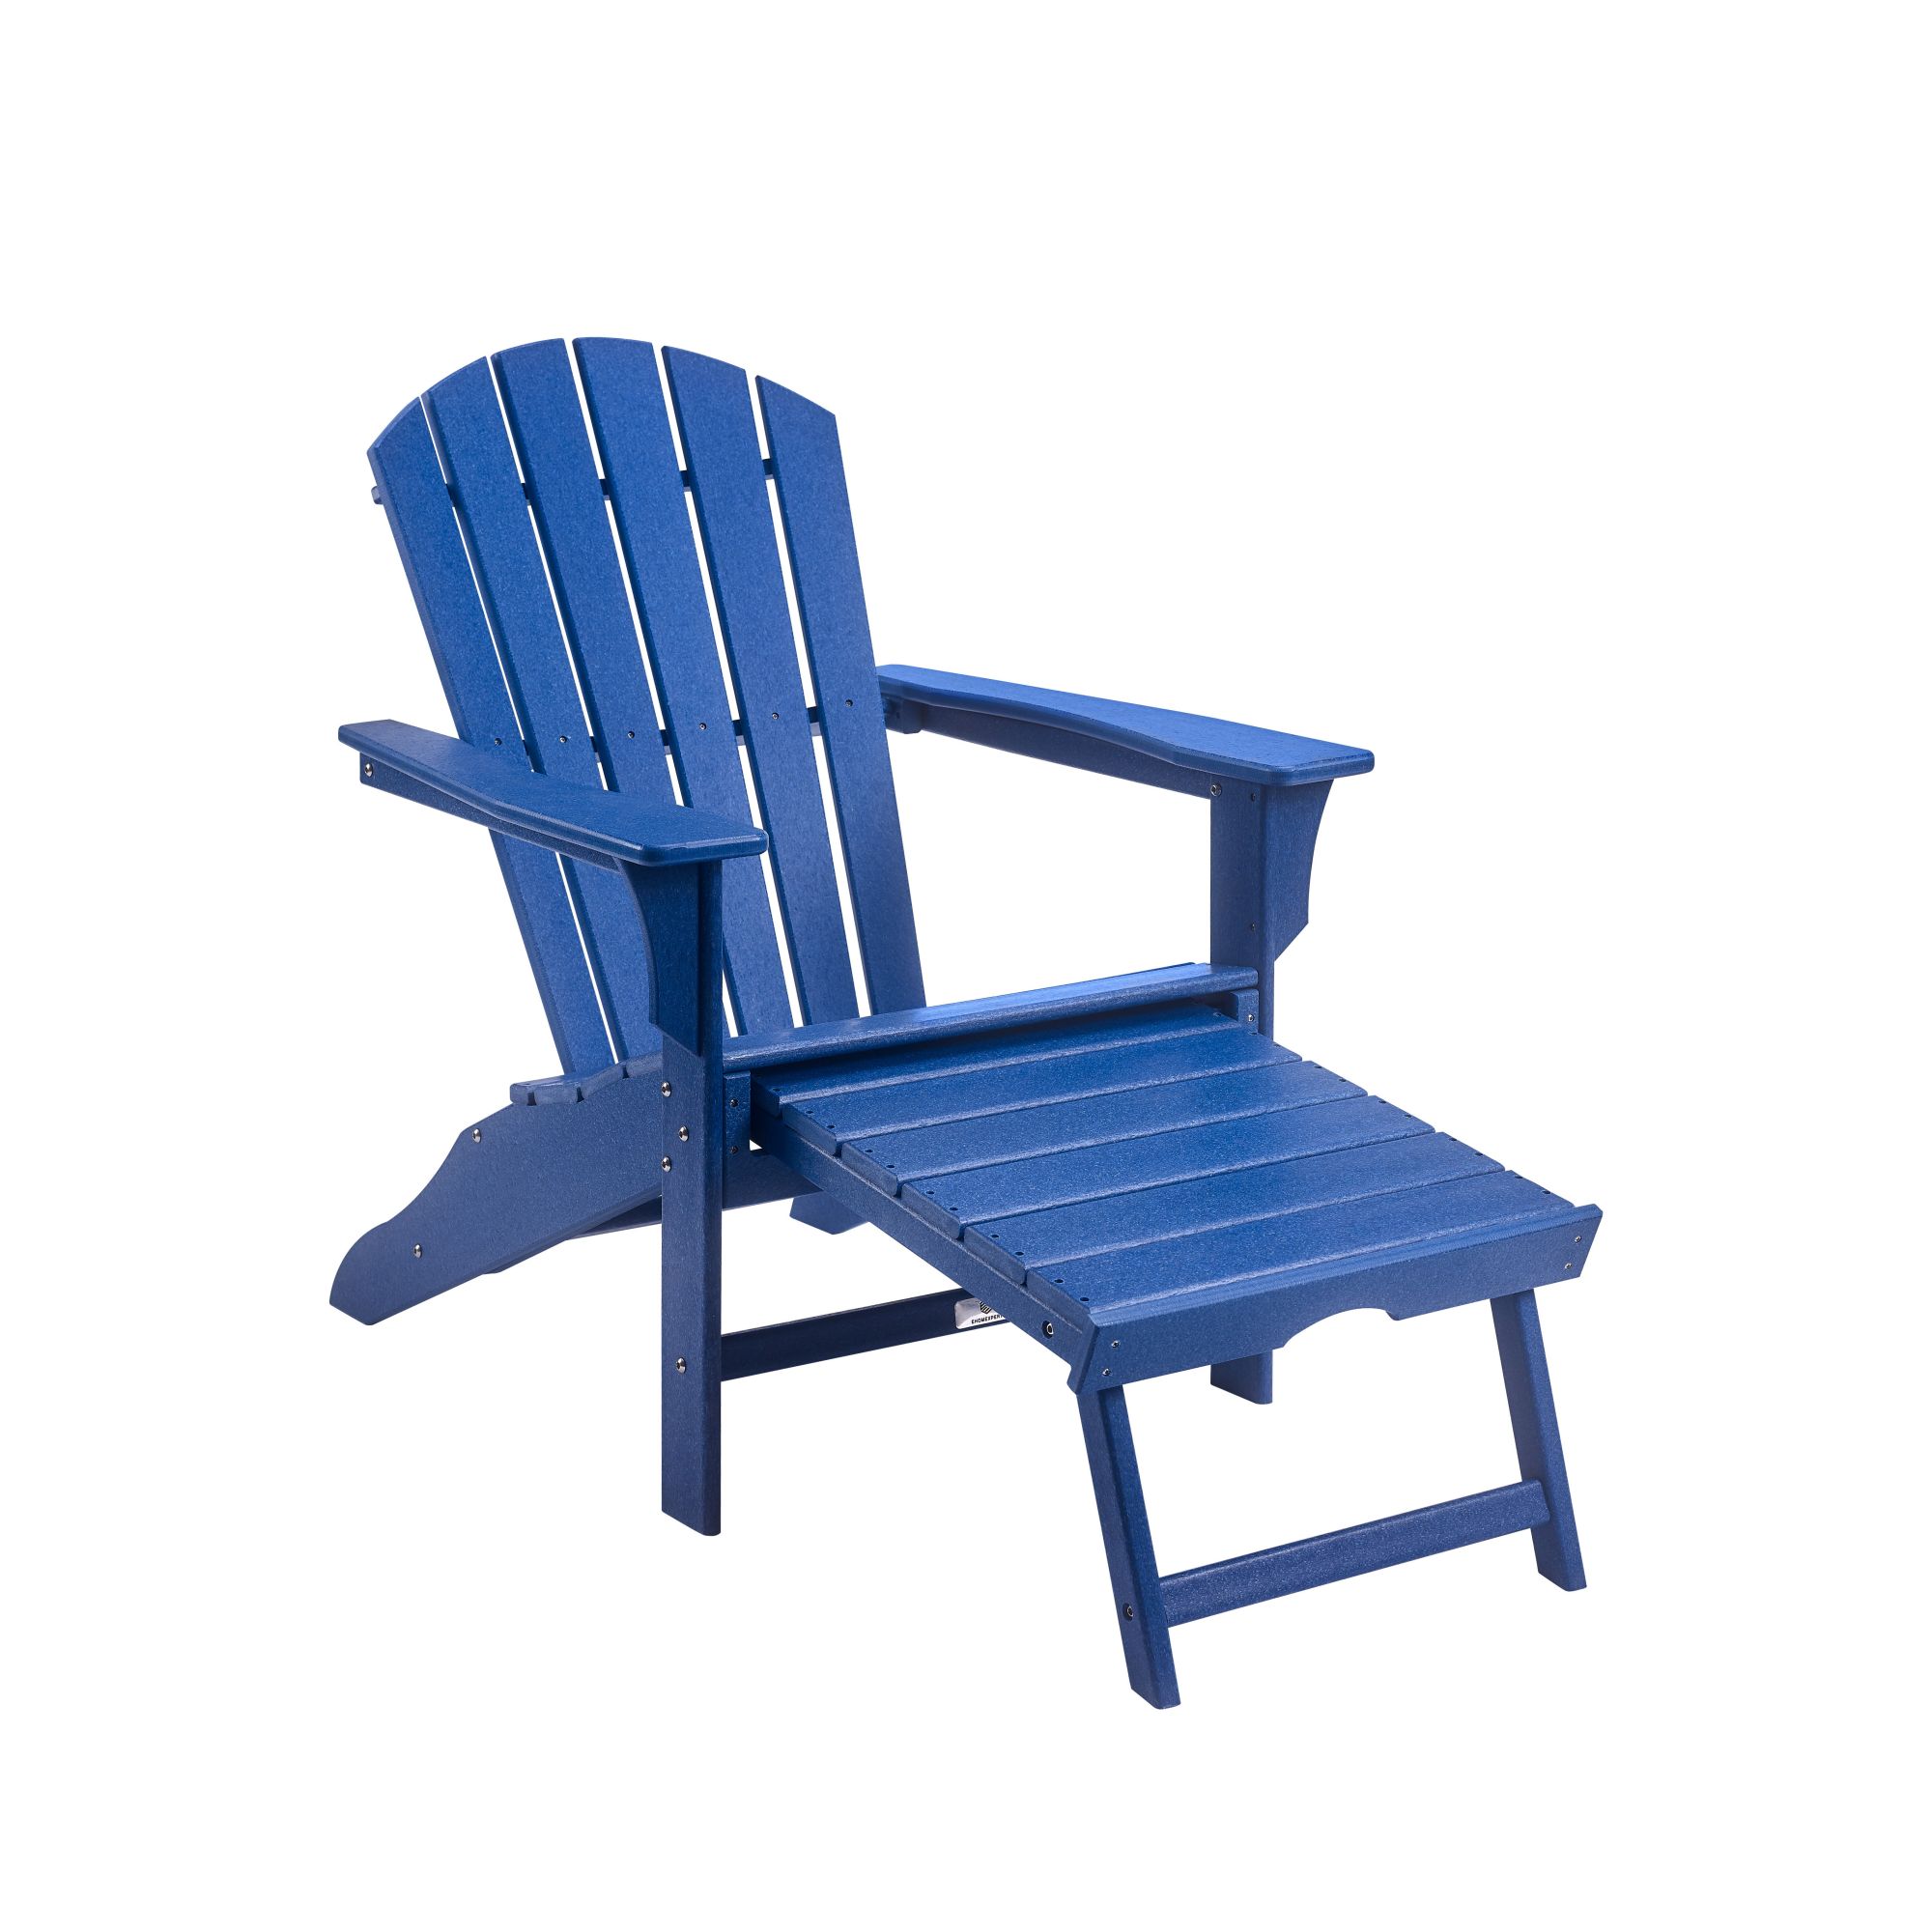 Classic Outdoor Adirondack Chair for Garden Porch Patio Deck Backyard, Weather Resistant Accent Furniture